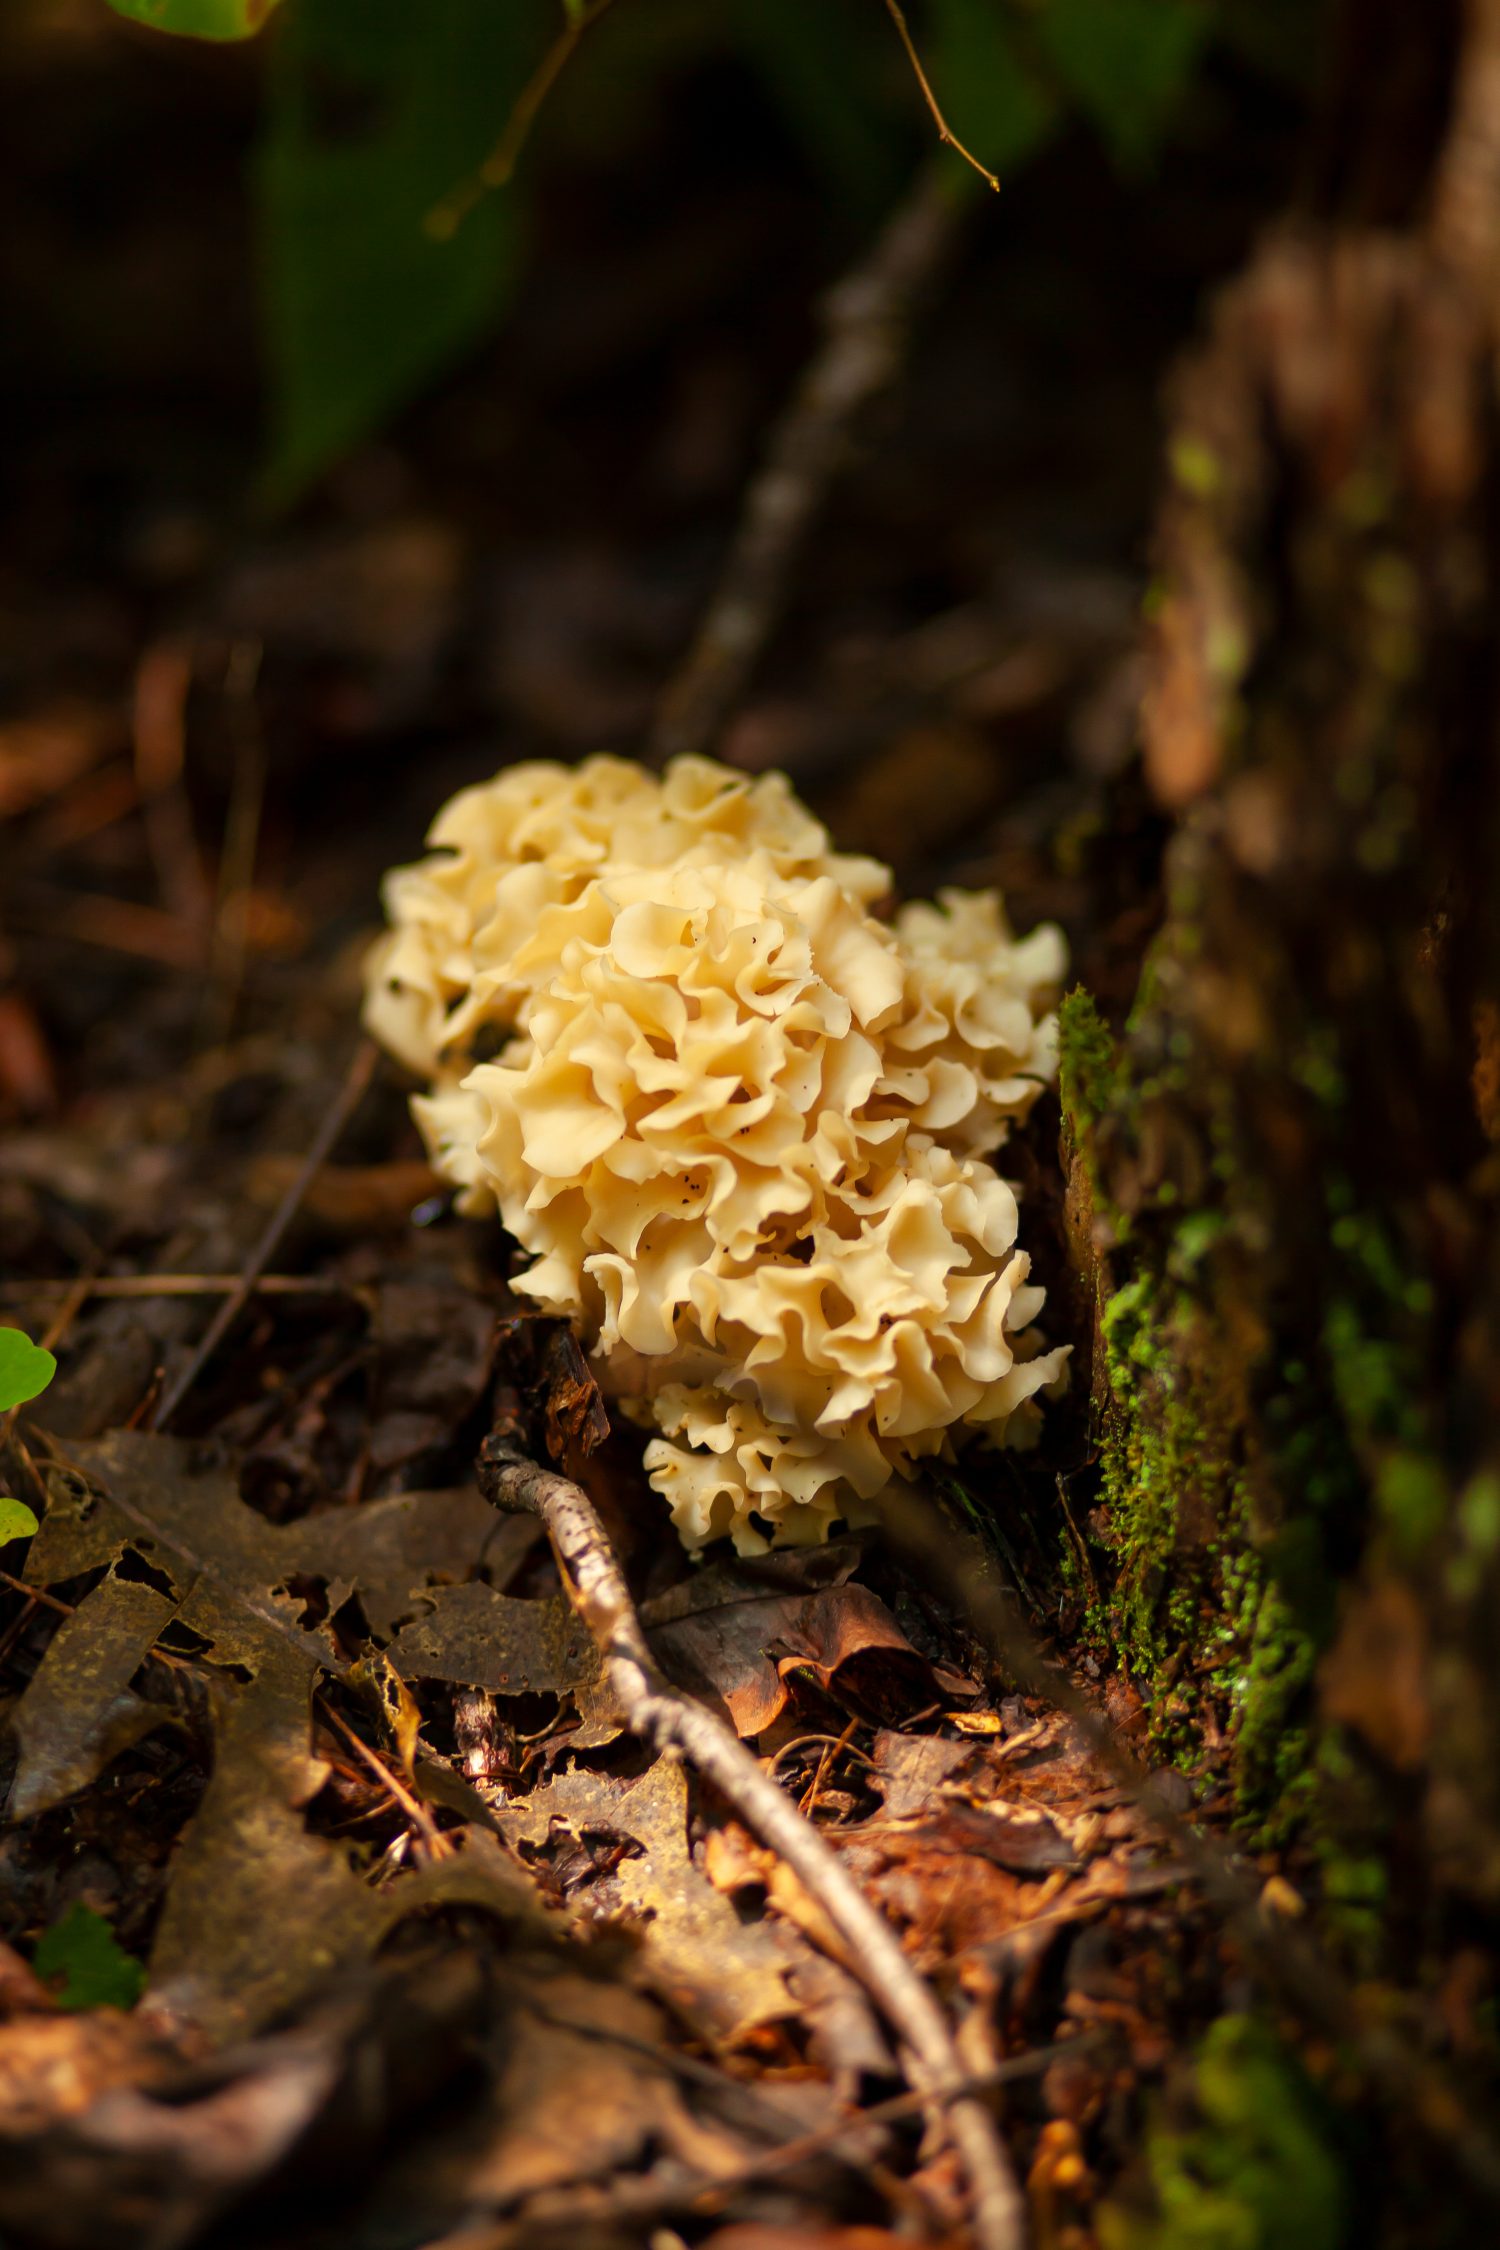 Close up image of Sparassis spathulata (the eastern cauliflower mushroom) on a muddy forest ground by a tree trunk in Maryland